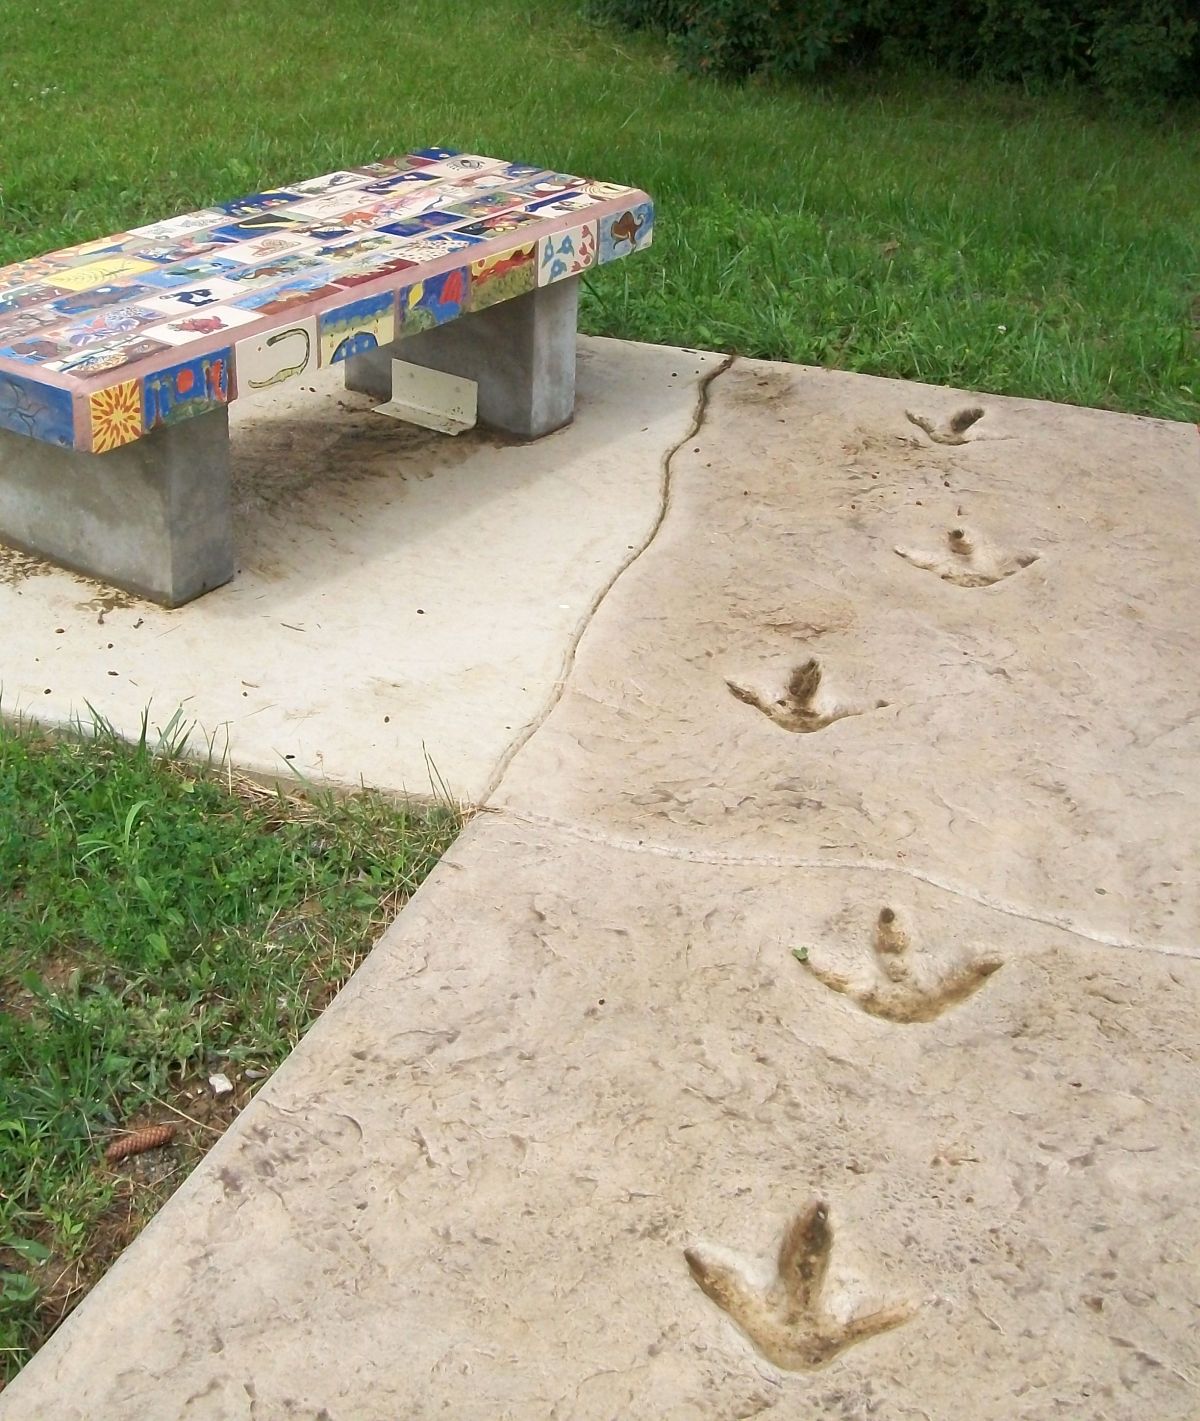 Moa tracks and benches